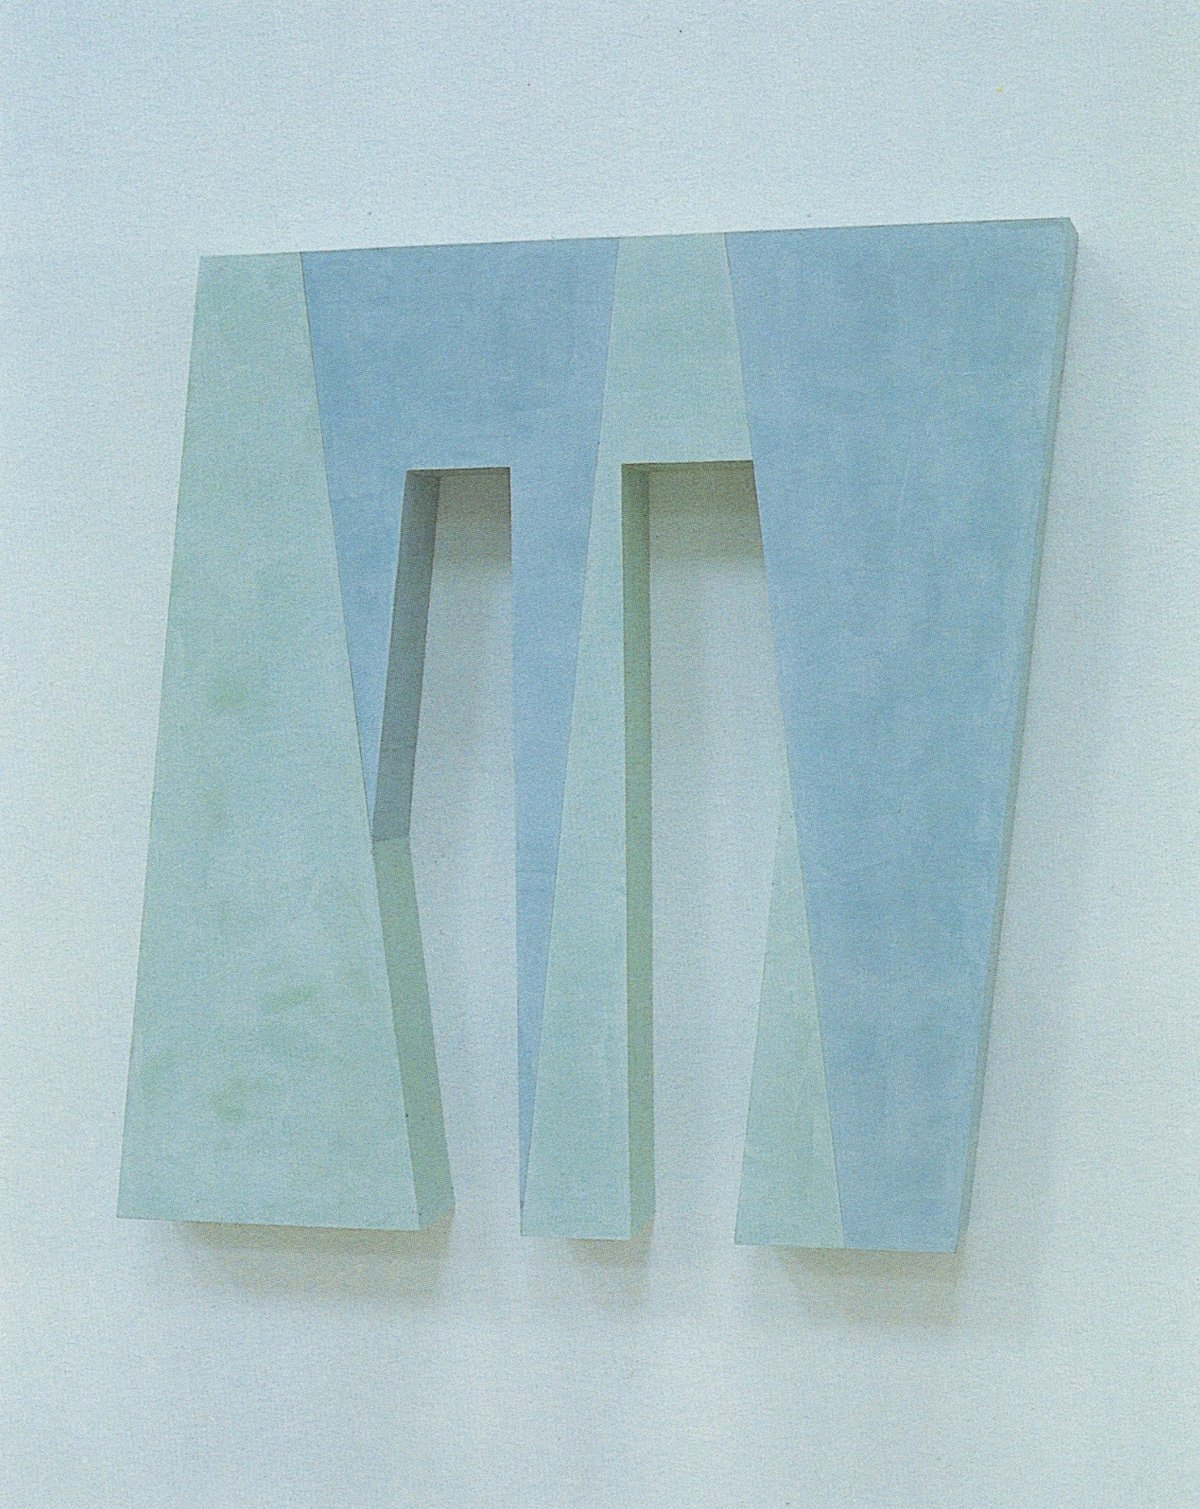 john carter, “untitled theme: pale blue and green” (1987), acrylic and marble powder on wood, 67,5 x 67,5 cm